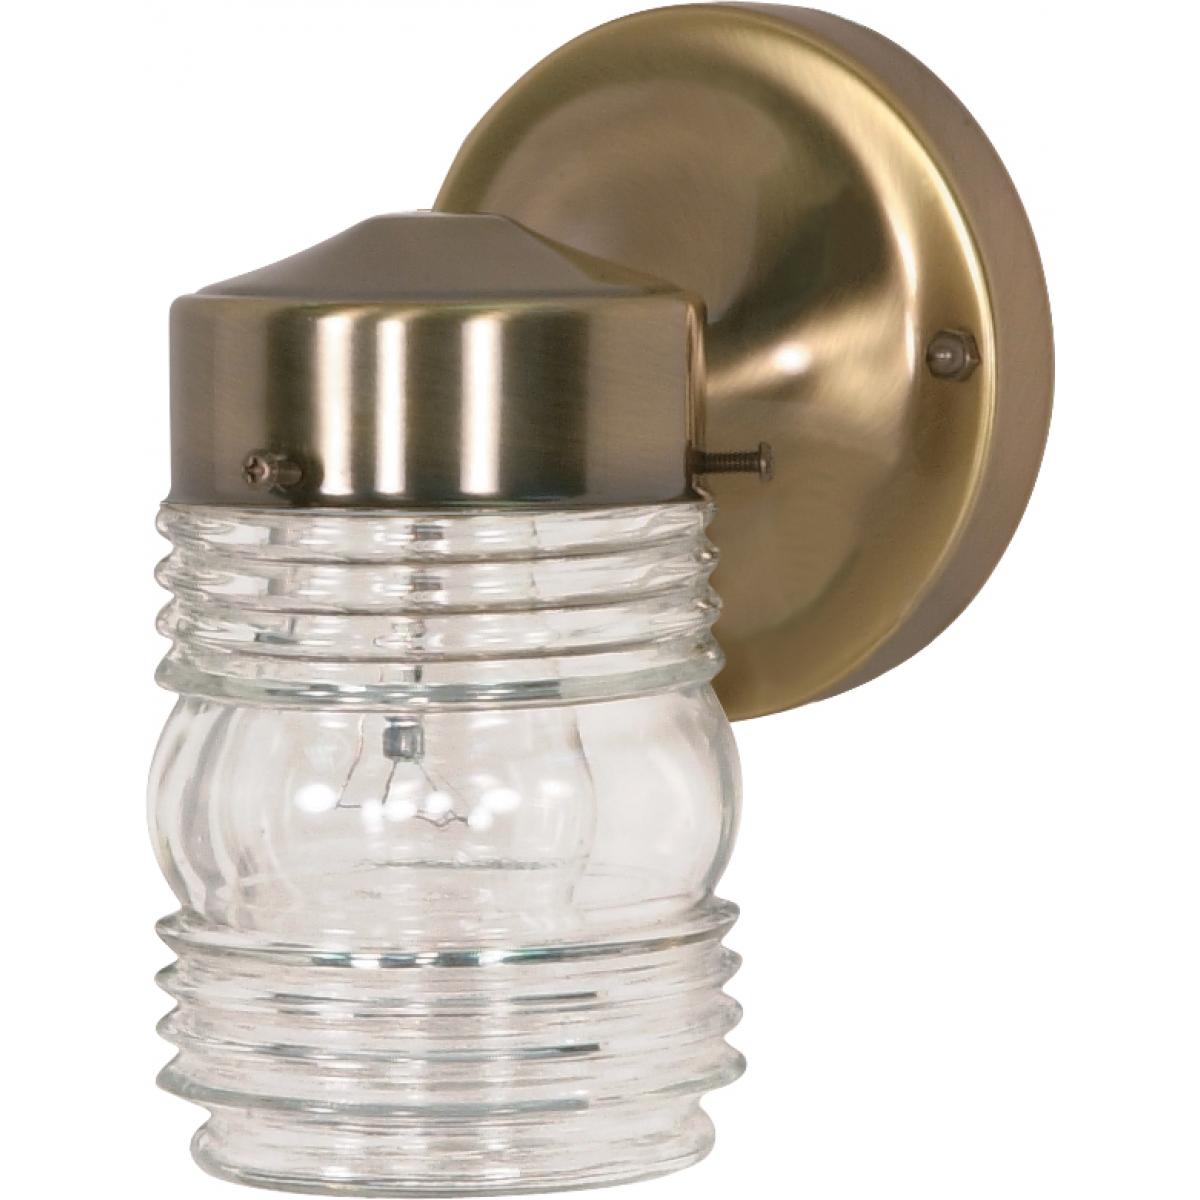 Satco 77-995 1 Light - 6" Wall - Mason Jar with Clear Glass - Antique Brass Finish